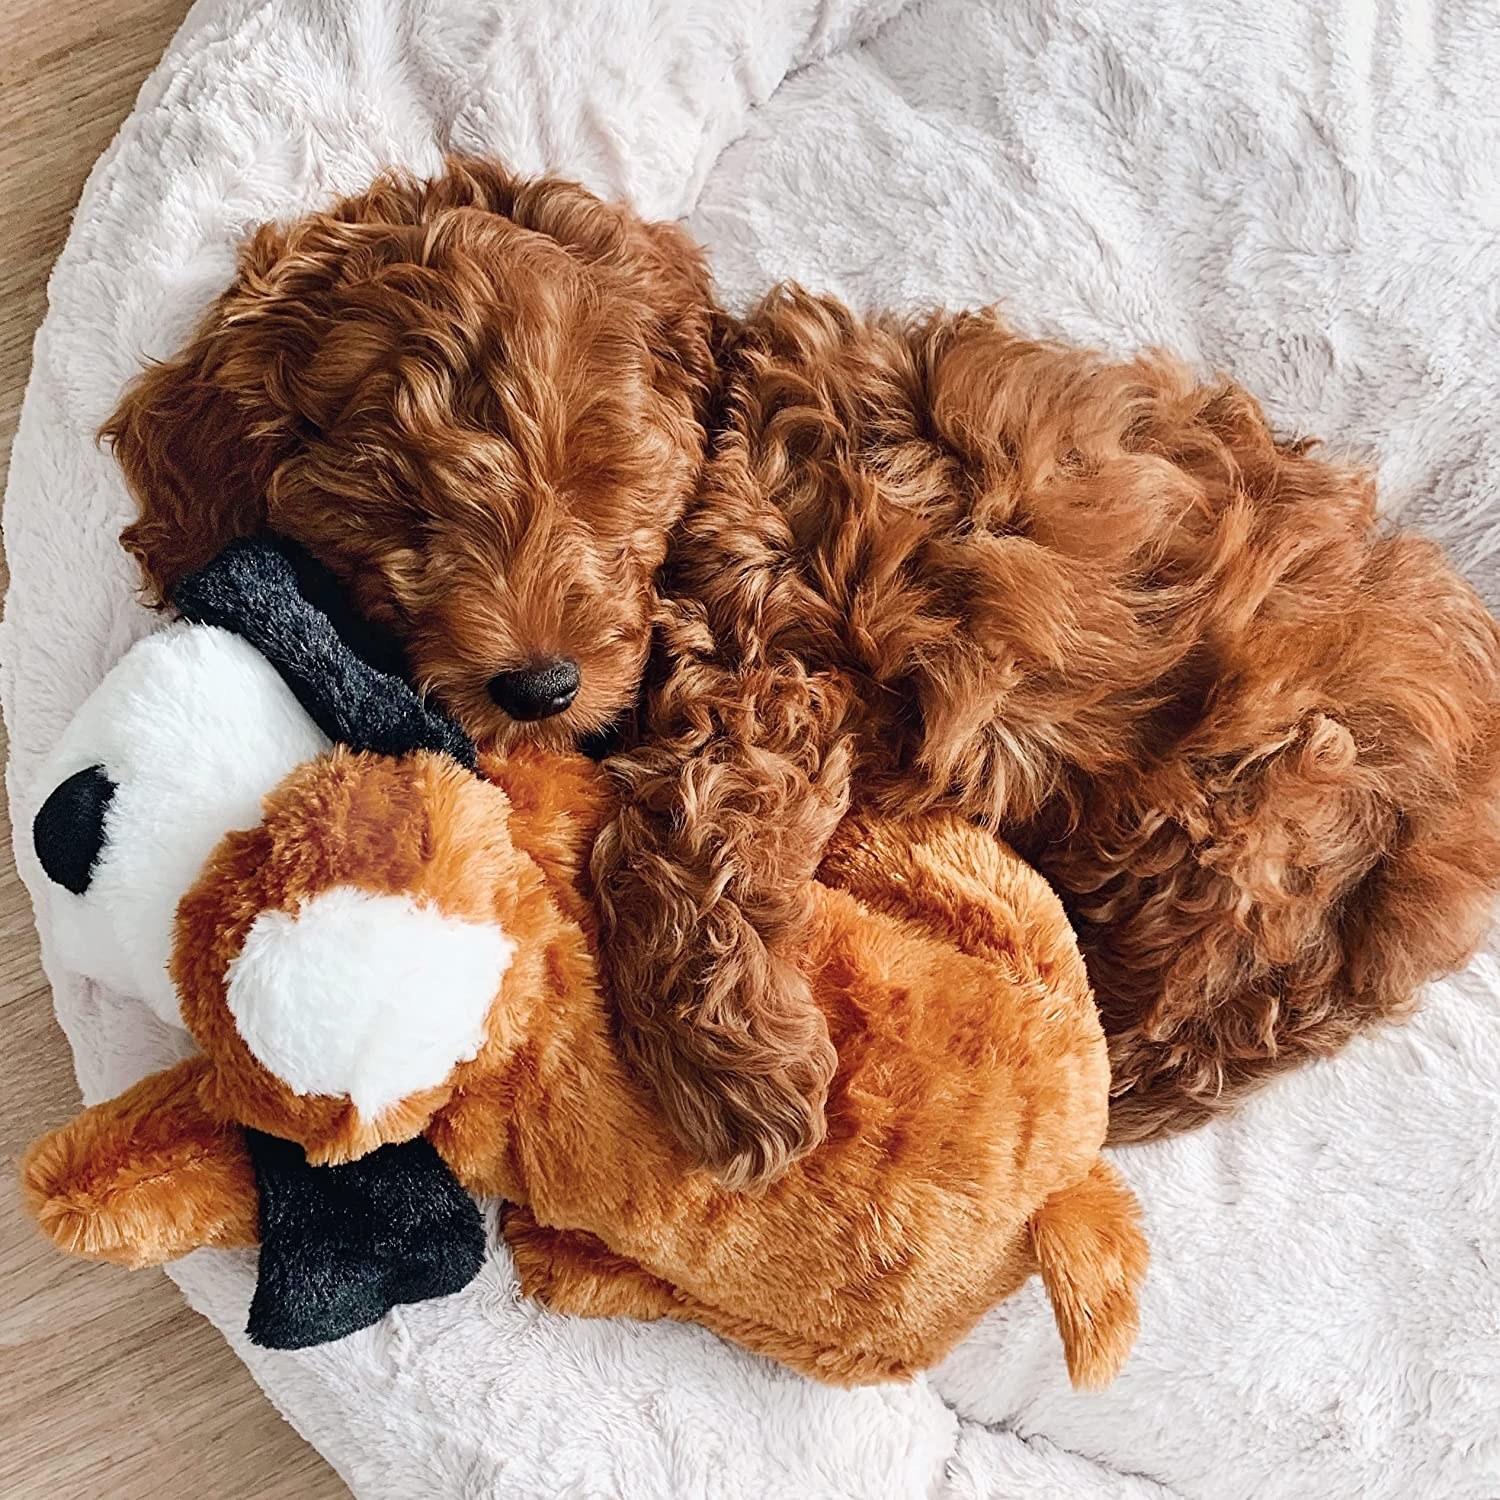 a dog snuggling with the toy